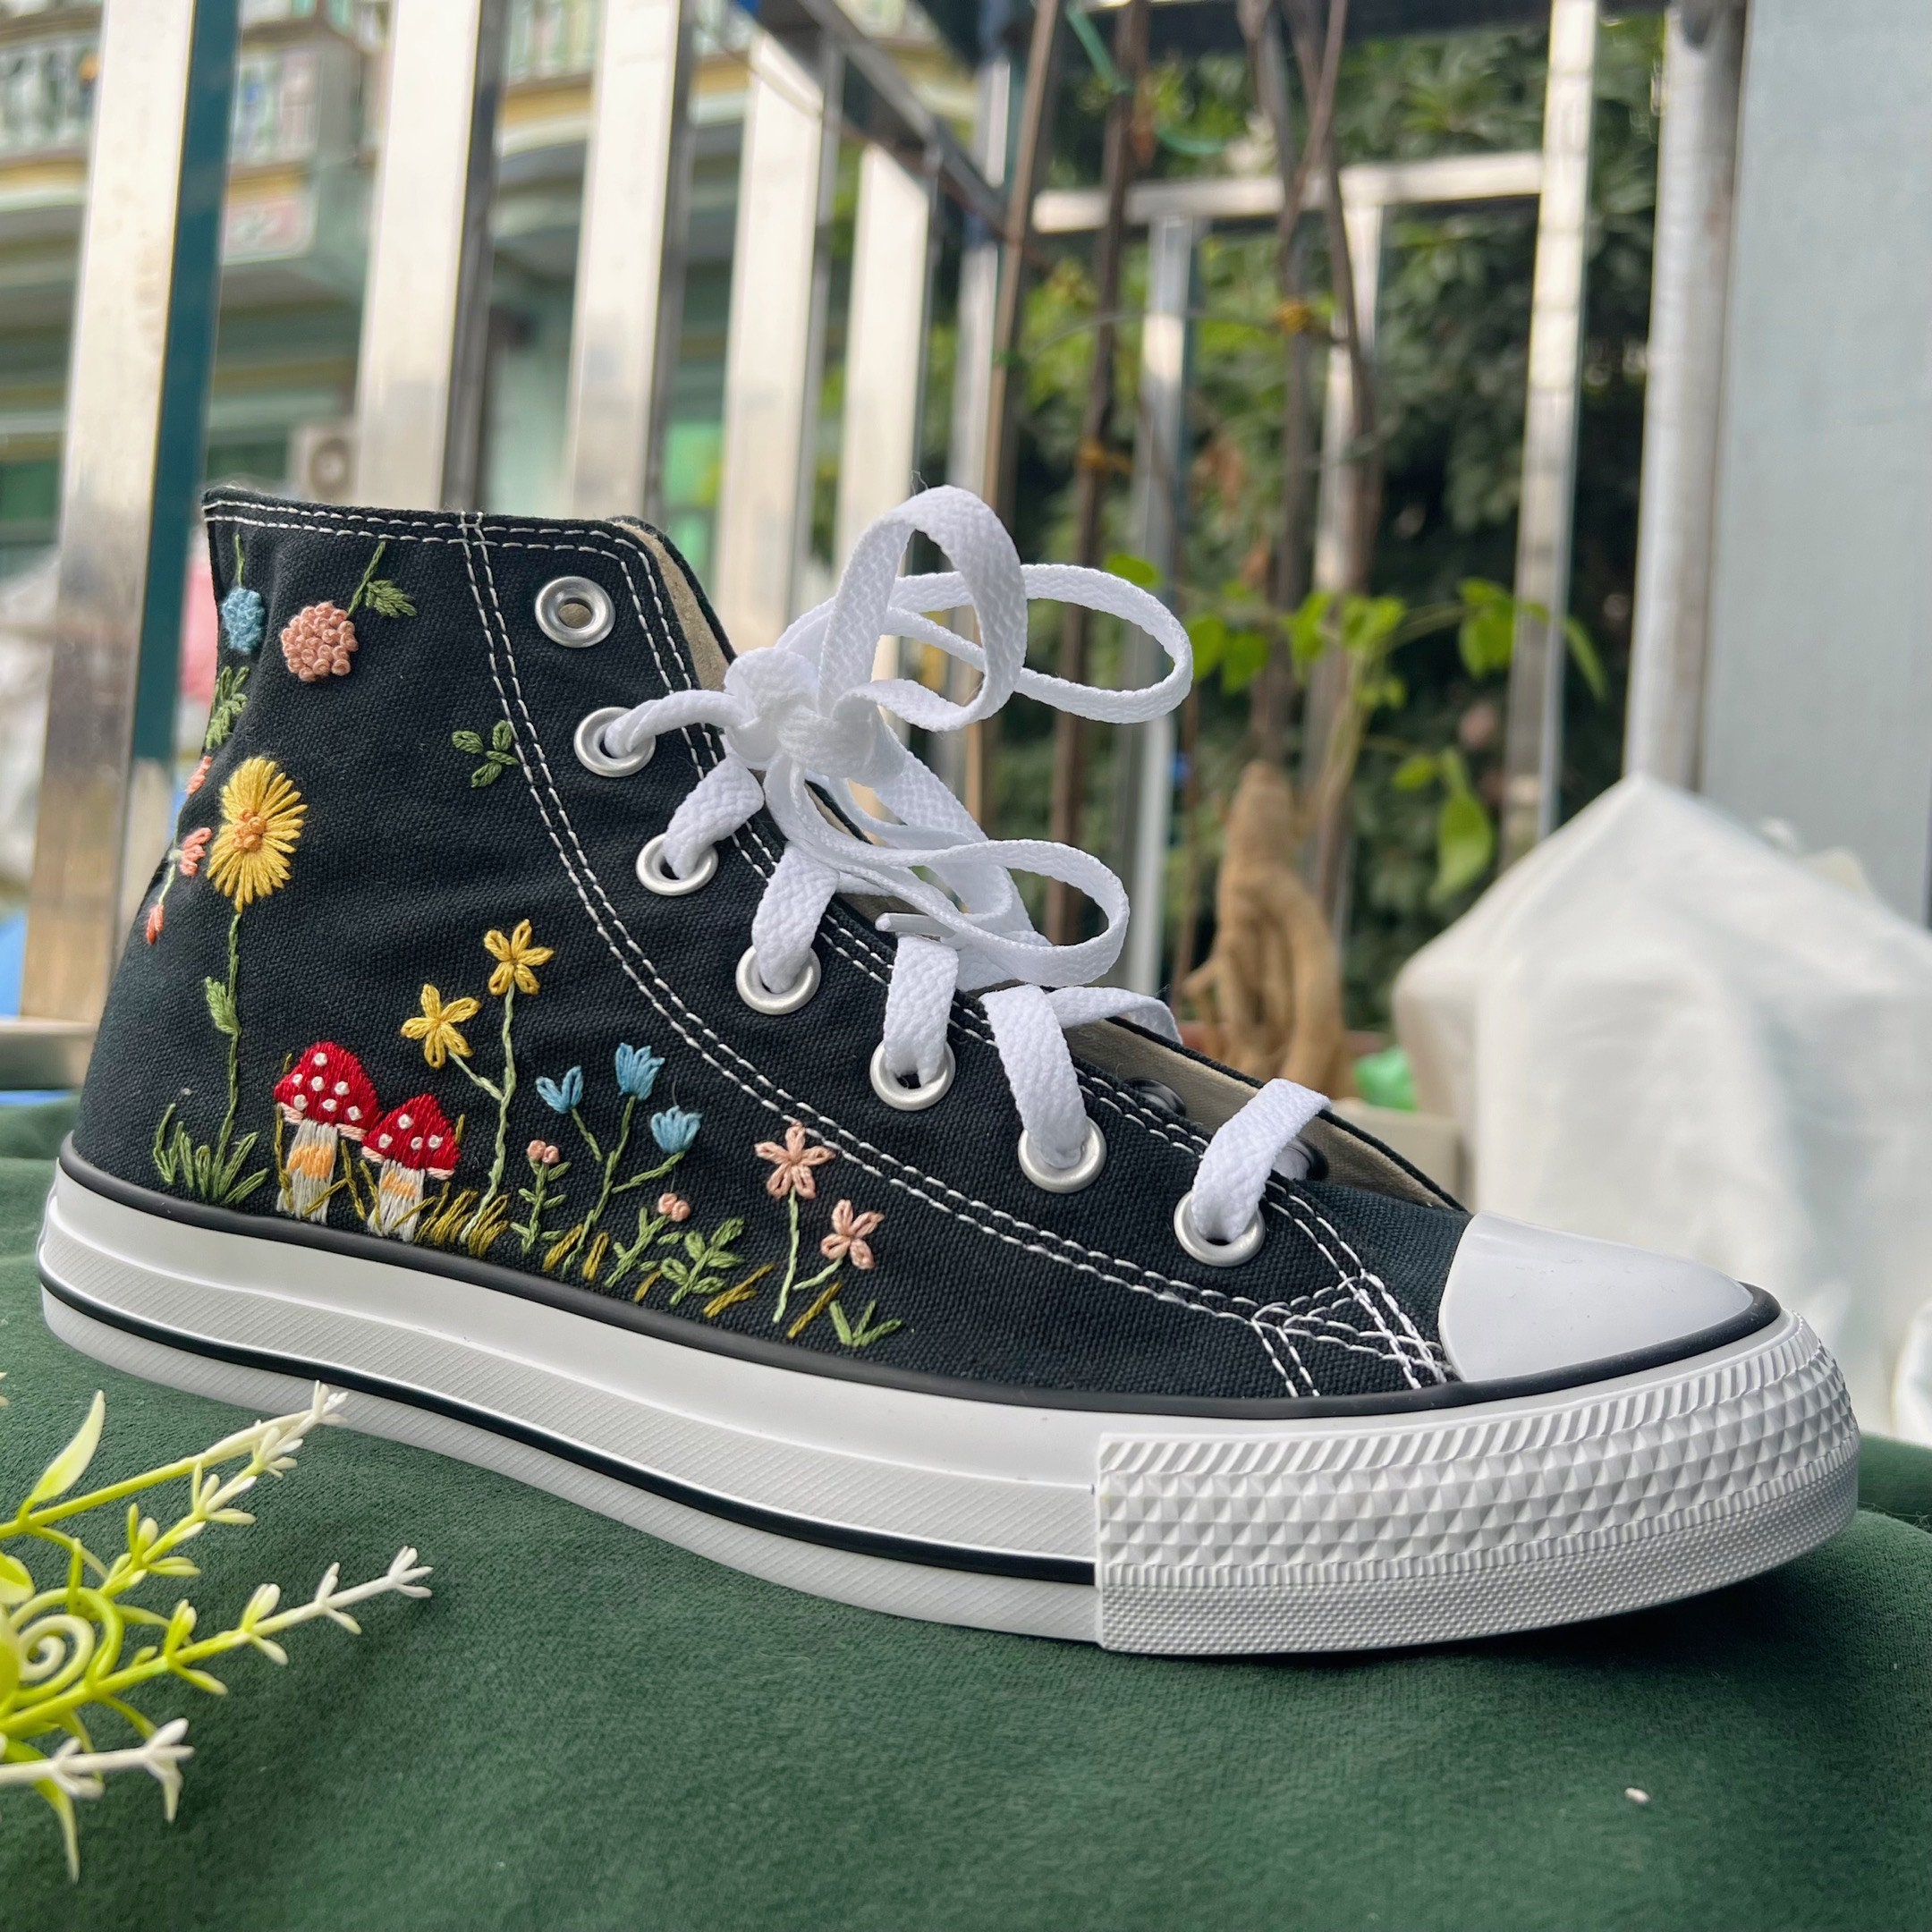 Mushroom Converse/converse High Tops Flower Embroidery and - Etsy